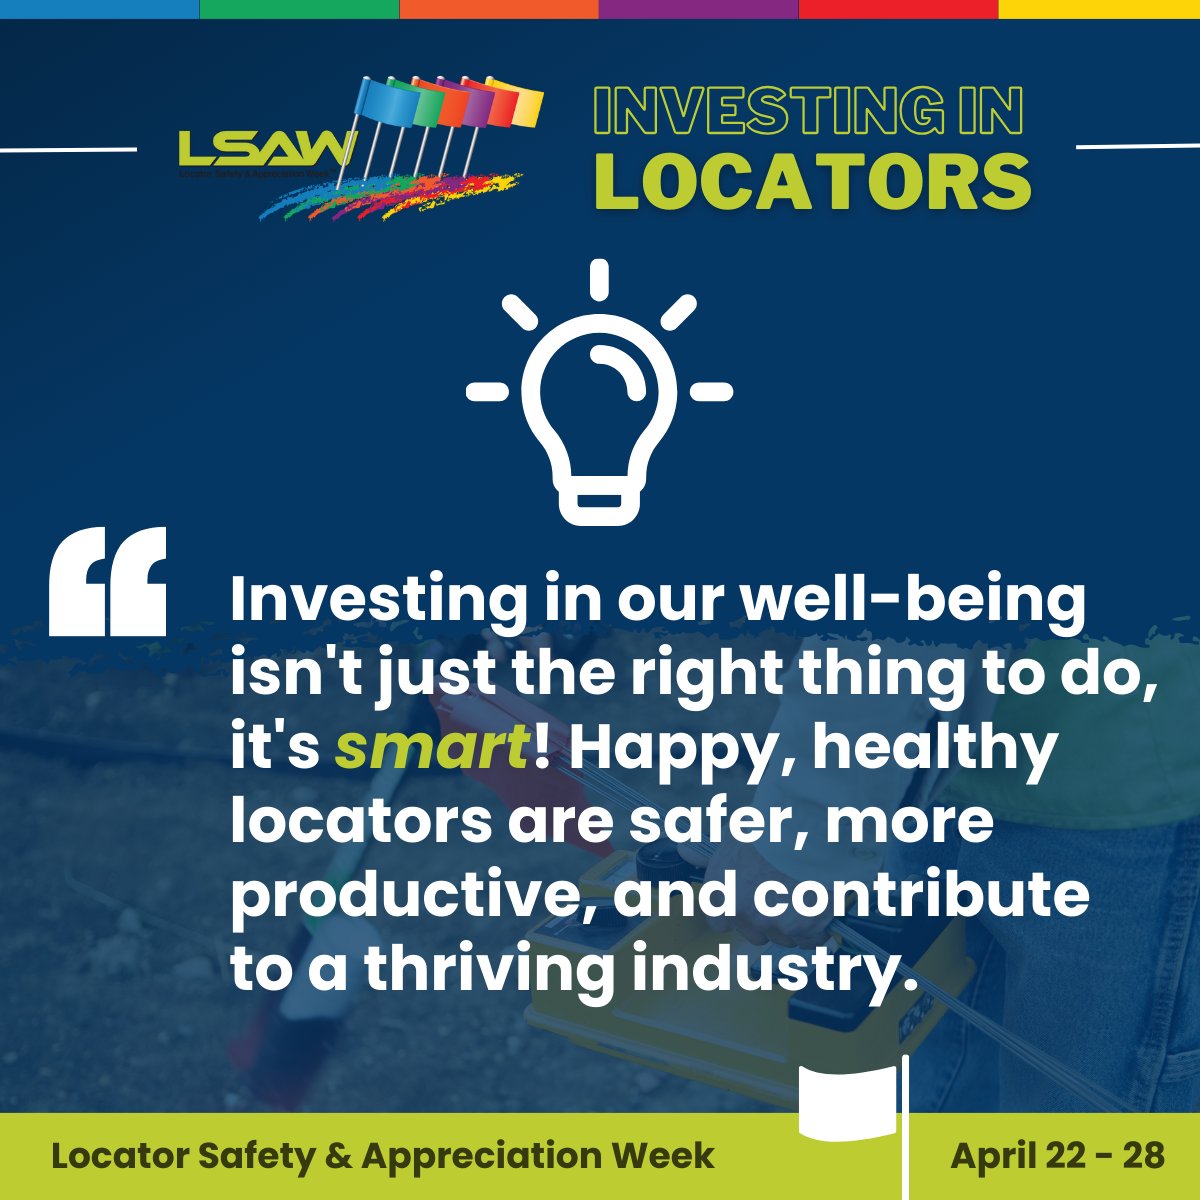 Kicking off #LSAW 2024 with major props to @LSAW for spotlighting our utility locators' crucial roles! Every day, these heroes ensure our utilities and communities flourish. Big THANKS to locators worldwide for your dedication and expertise! #UtilityHeroes #CommunityChampions